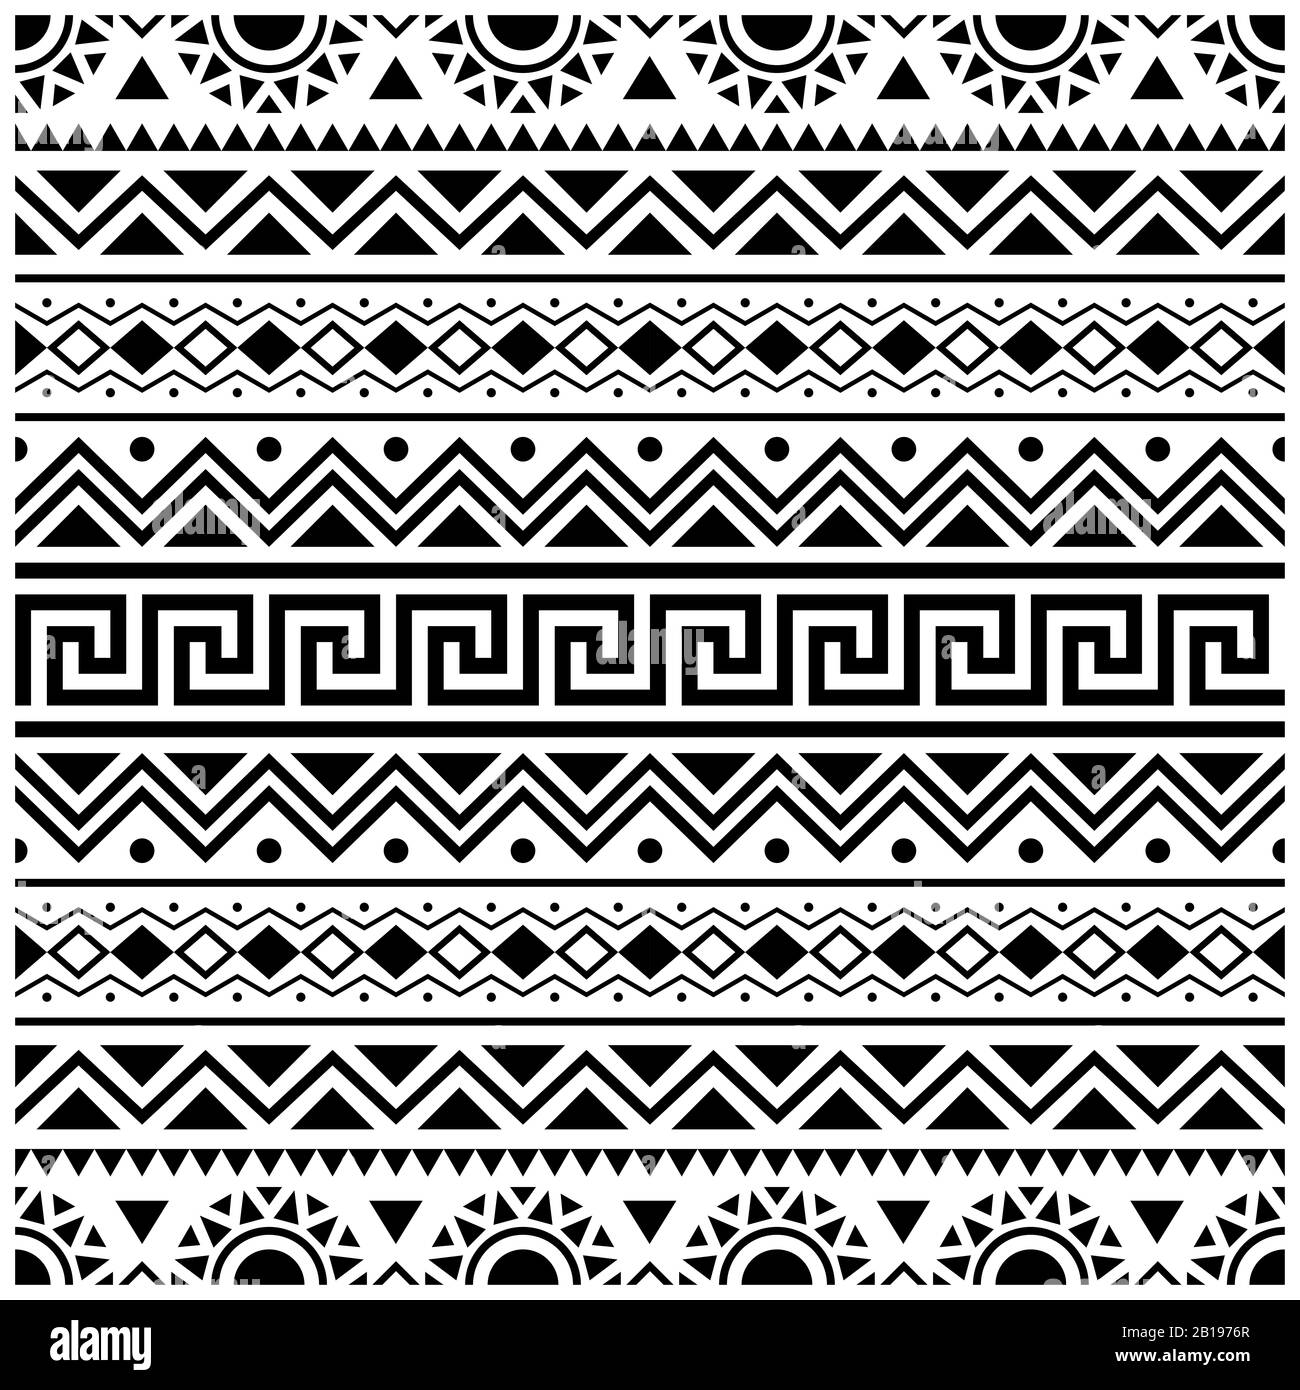 Simple Aztec Designs To Draw